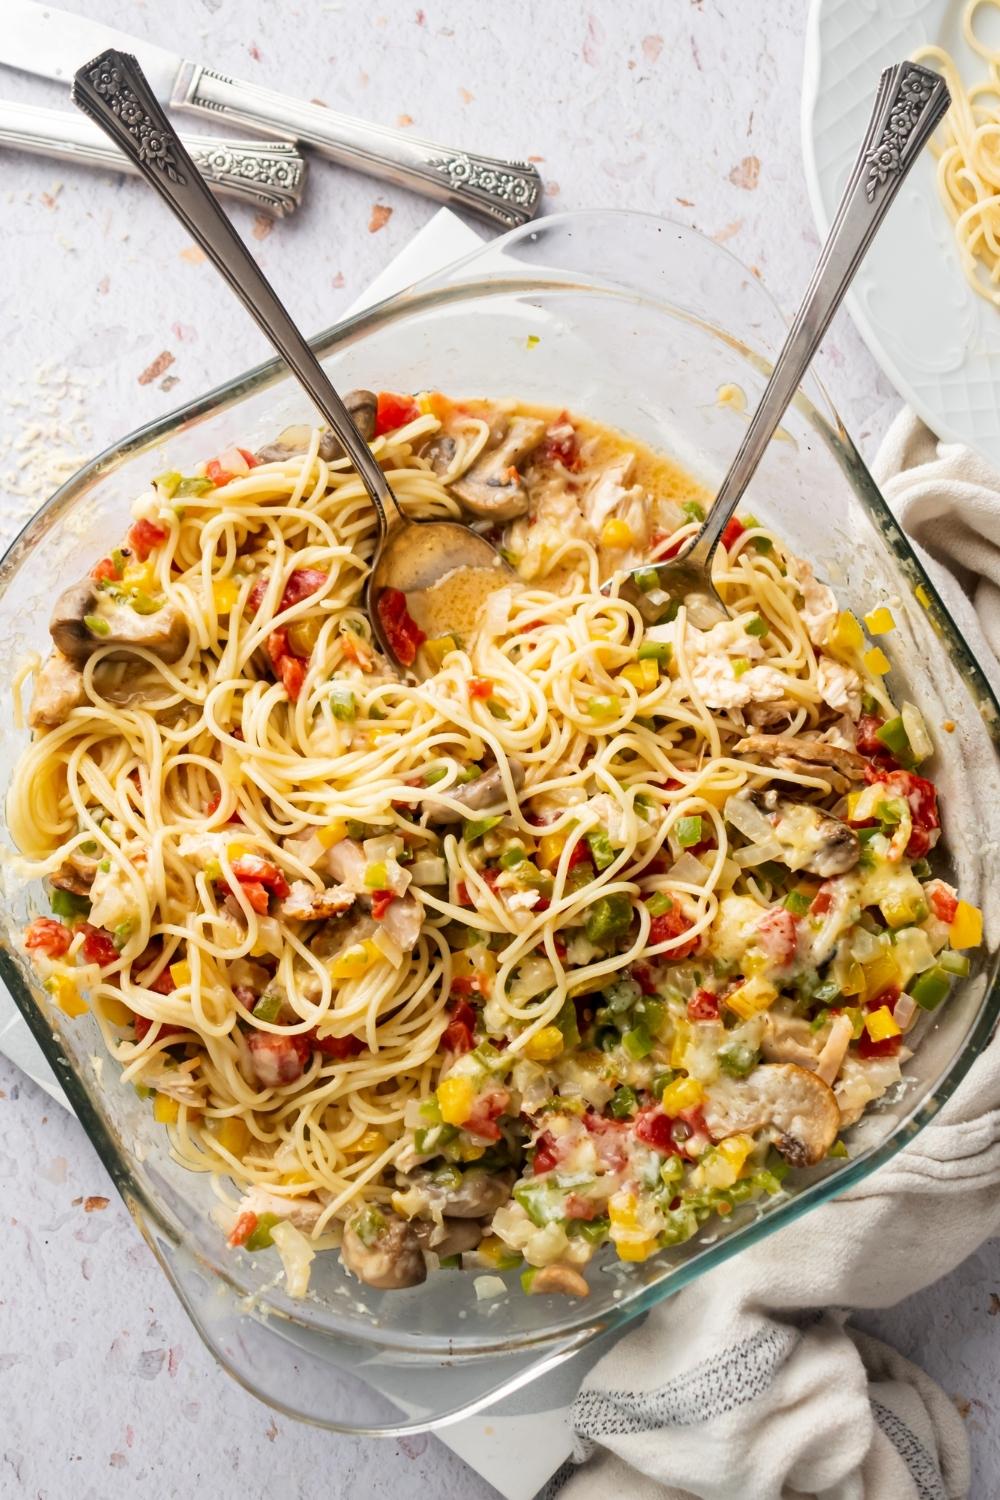 Spaghetti noodles and other chicken spaghetti ingredients in a glass casserole dish.